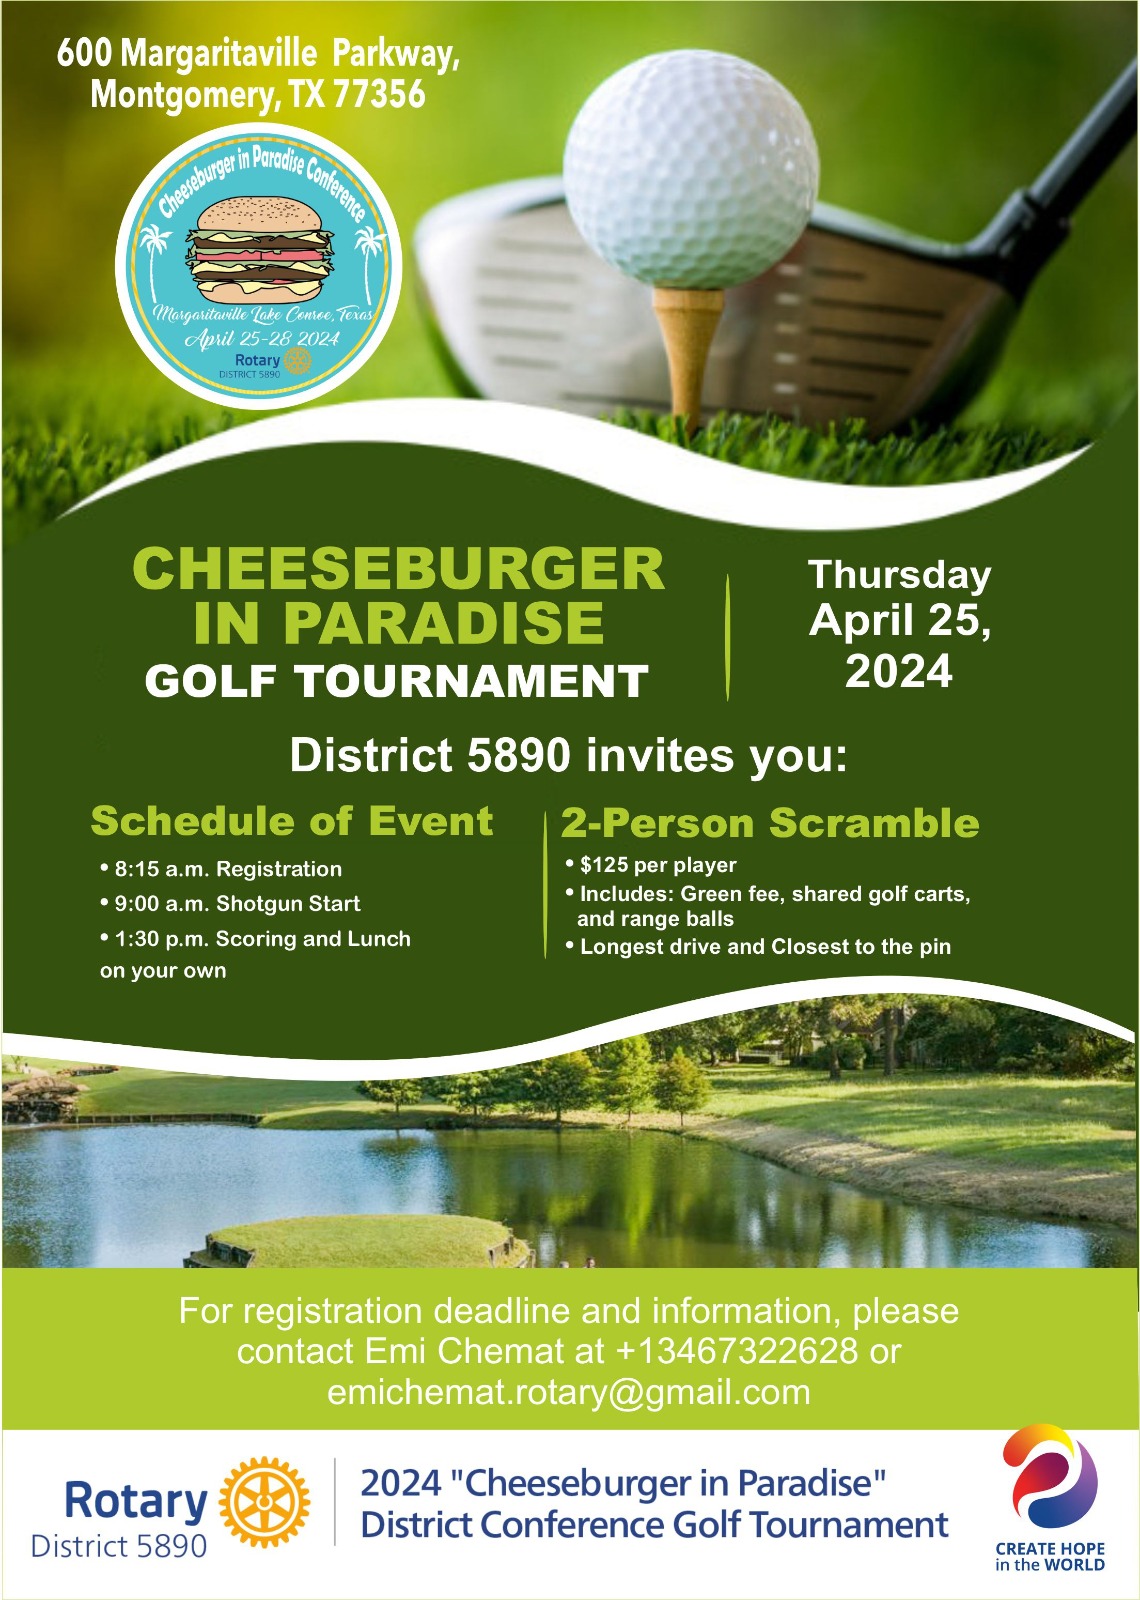 Cheeseburger in Paradise 2024 District Conference